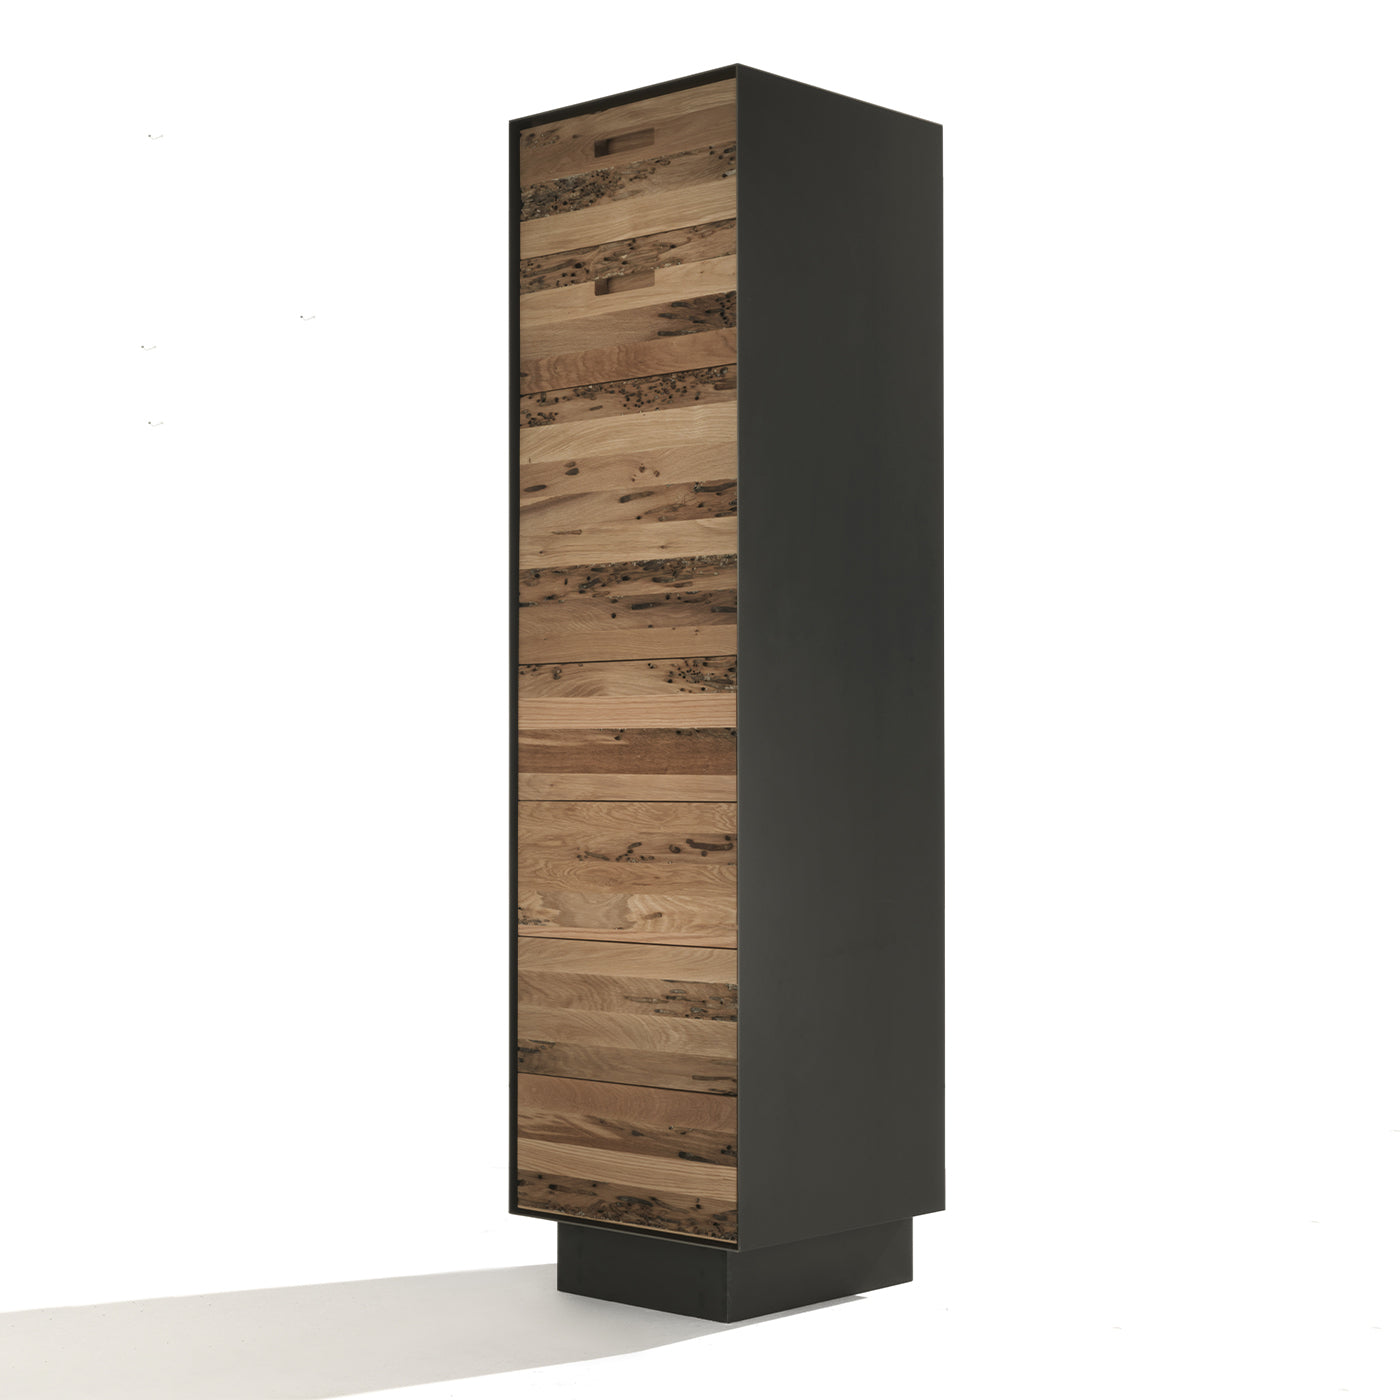 Rialto Tower 2 Chest of Drawers by Giuliano & Gabriele Cappelletti - Alternative view 1